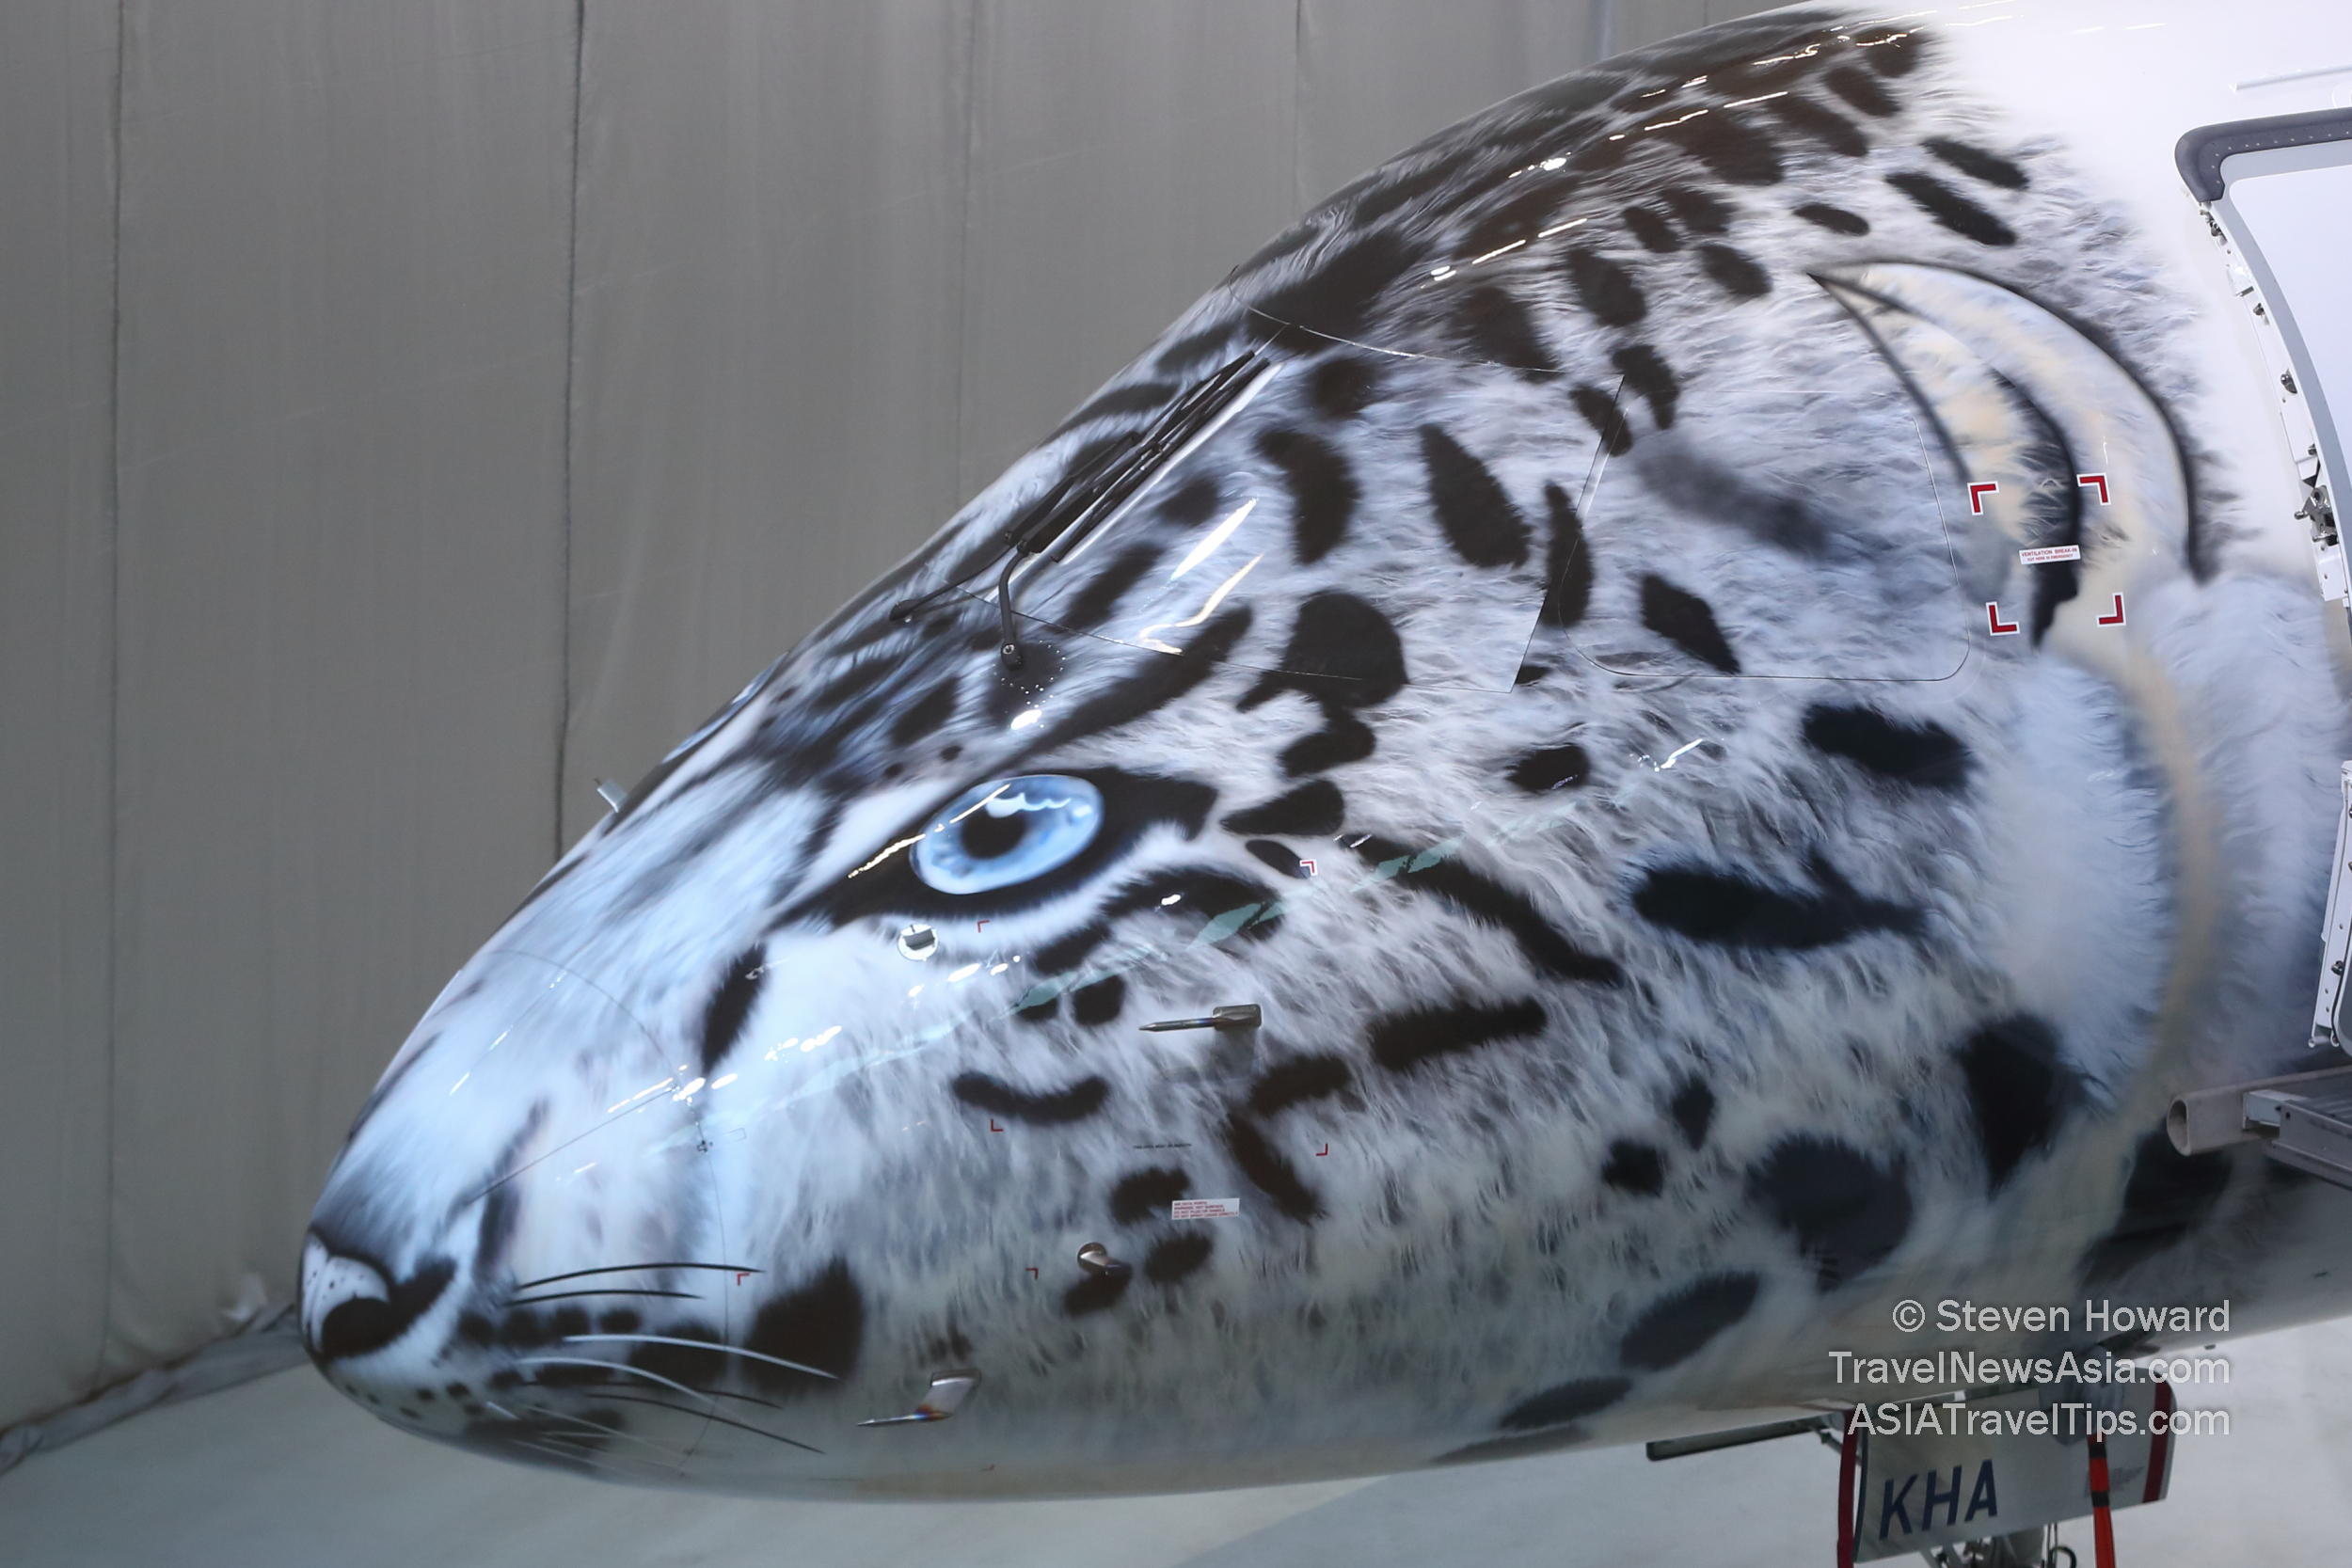 Snow leopard nose of an Air Astana Embraer E190-E2. Picture by Steven Howard of TravelNewsAsia.com Click to enlarge.